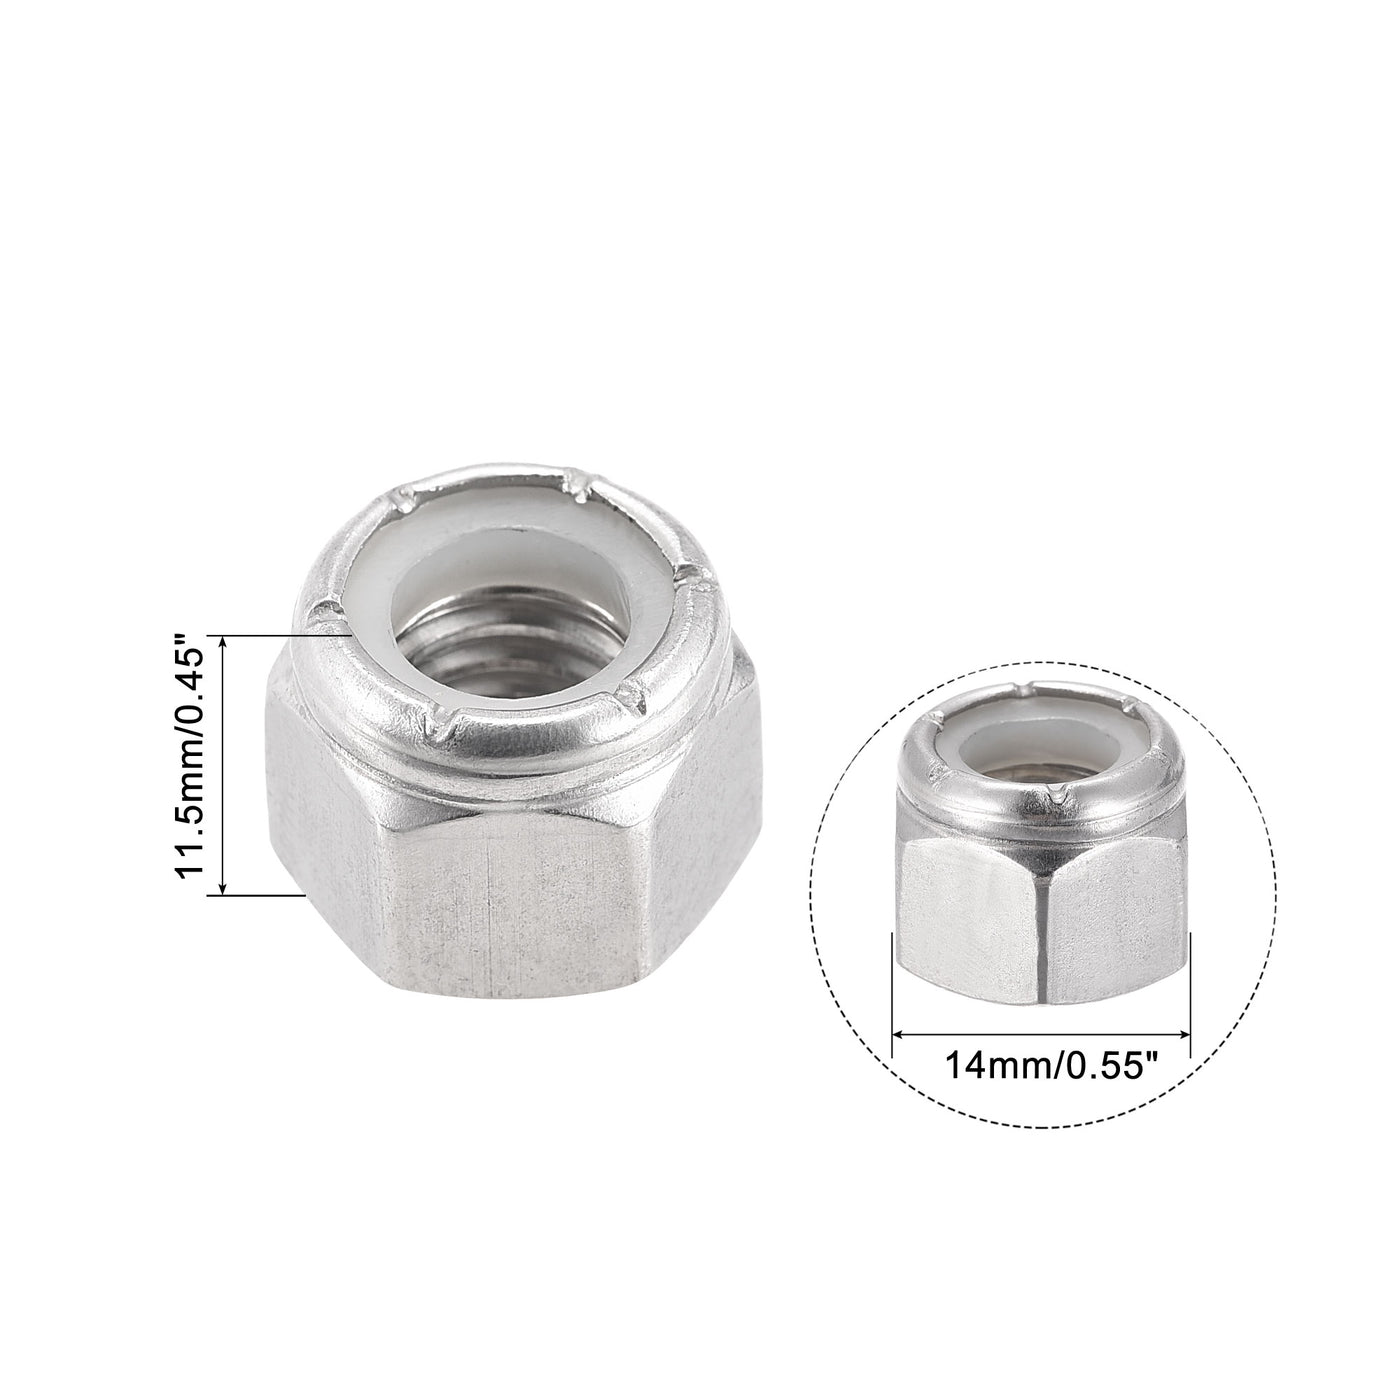 uxcell Uxcell 3/8-16 UNC Nylon Insert Hex Lock Nuts, 304 Stainless Steel, Plain Finish, 10pcs